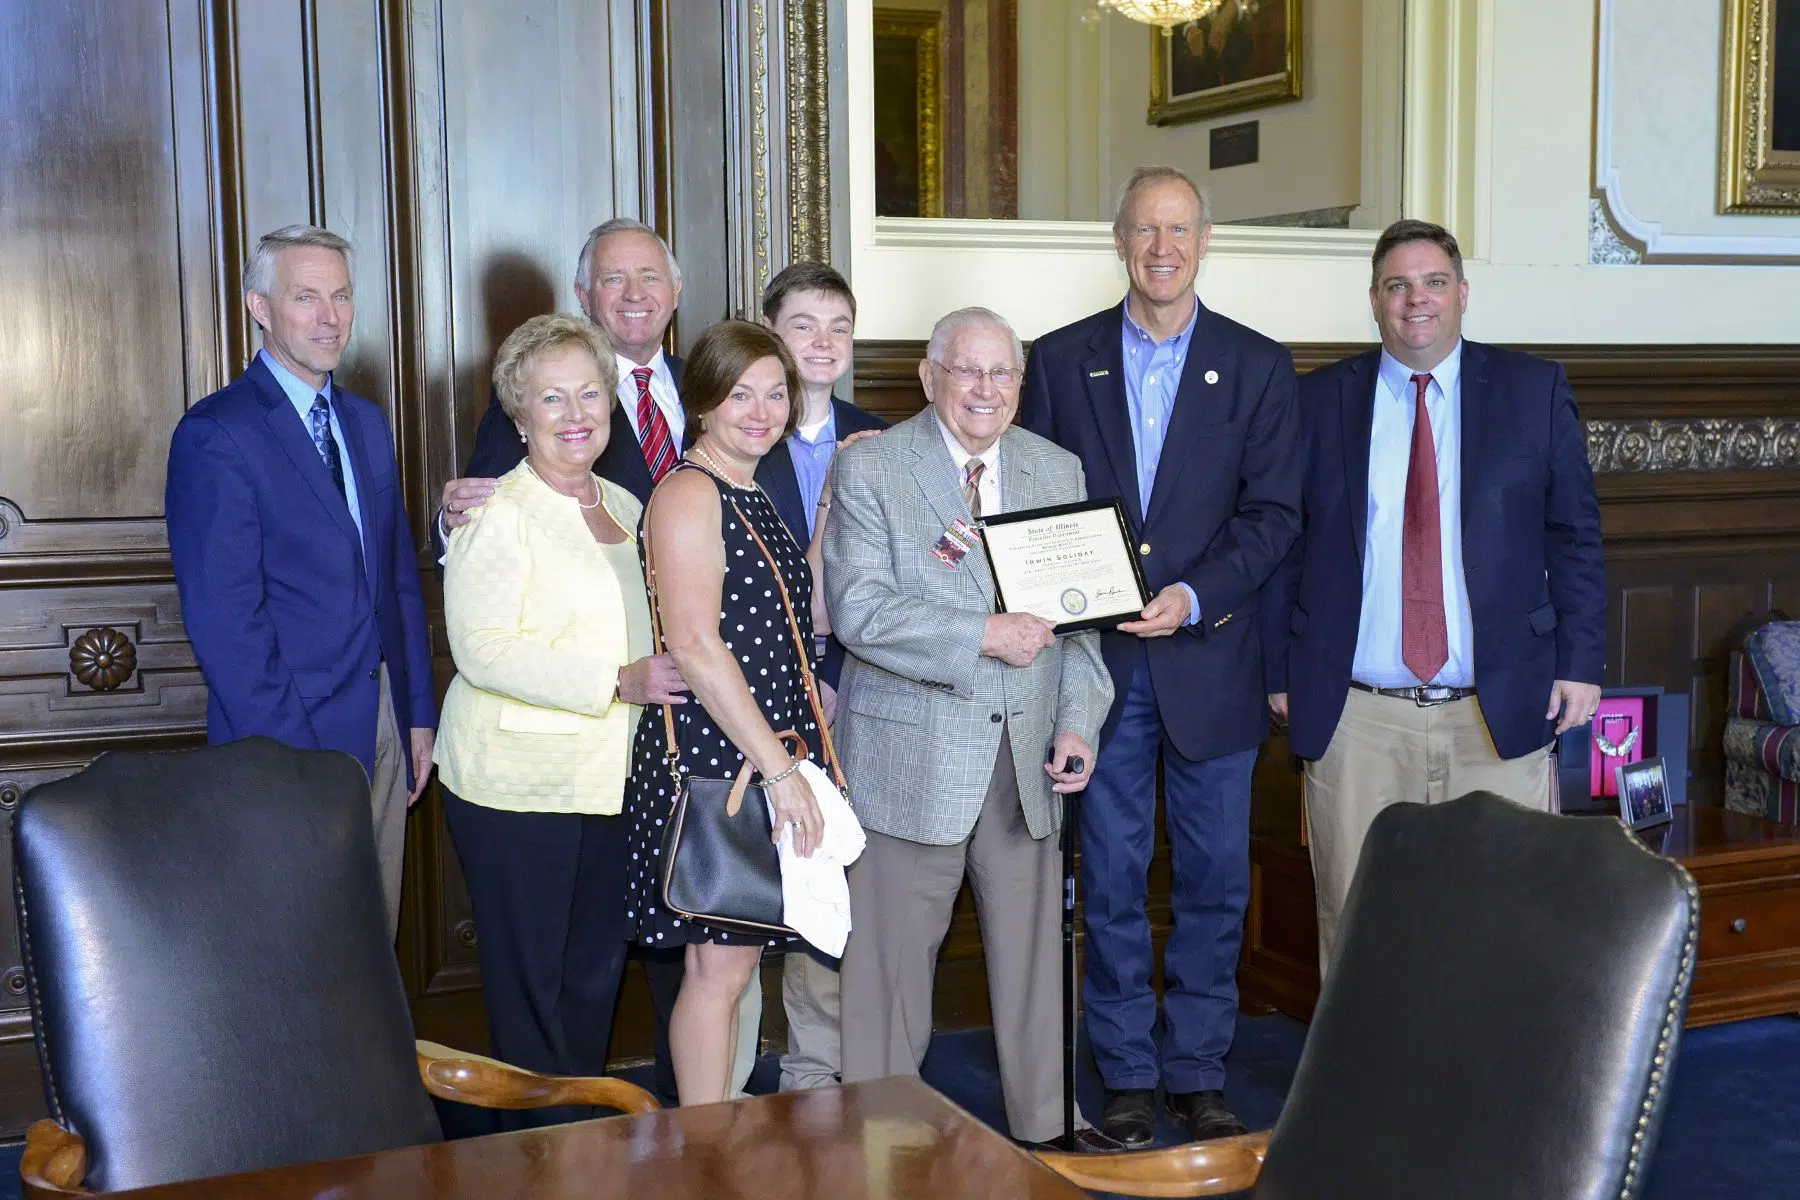 Rose honors 100-year-old WWII veteran, Forsyth resident at Statehouse